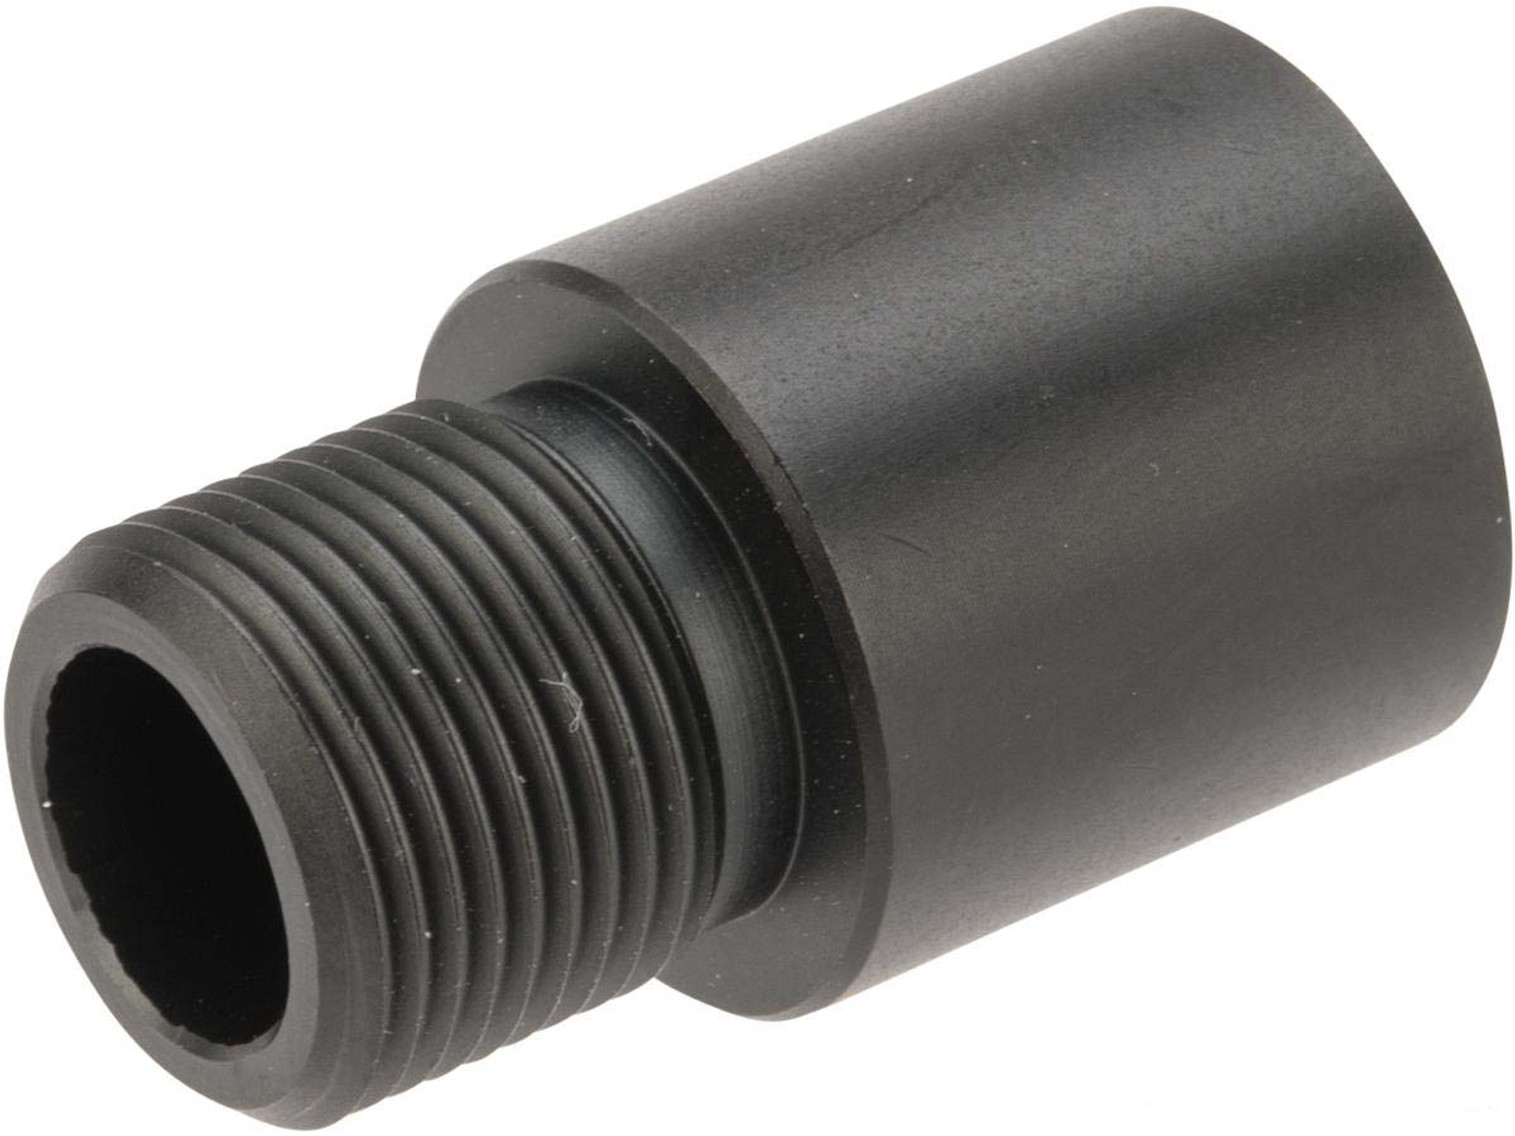 UFC 18mm Threaded Barrel Extension for 18mm Threaded Outer Barrel (Model: Positive to Positive / 35mm)